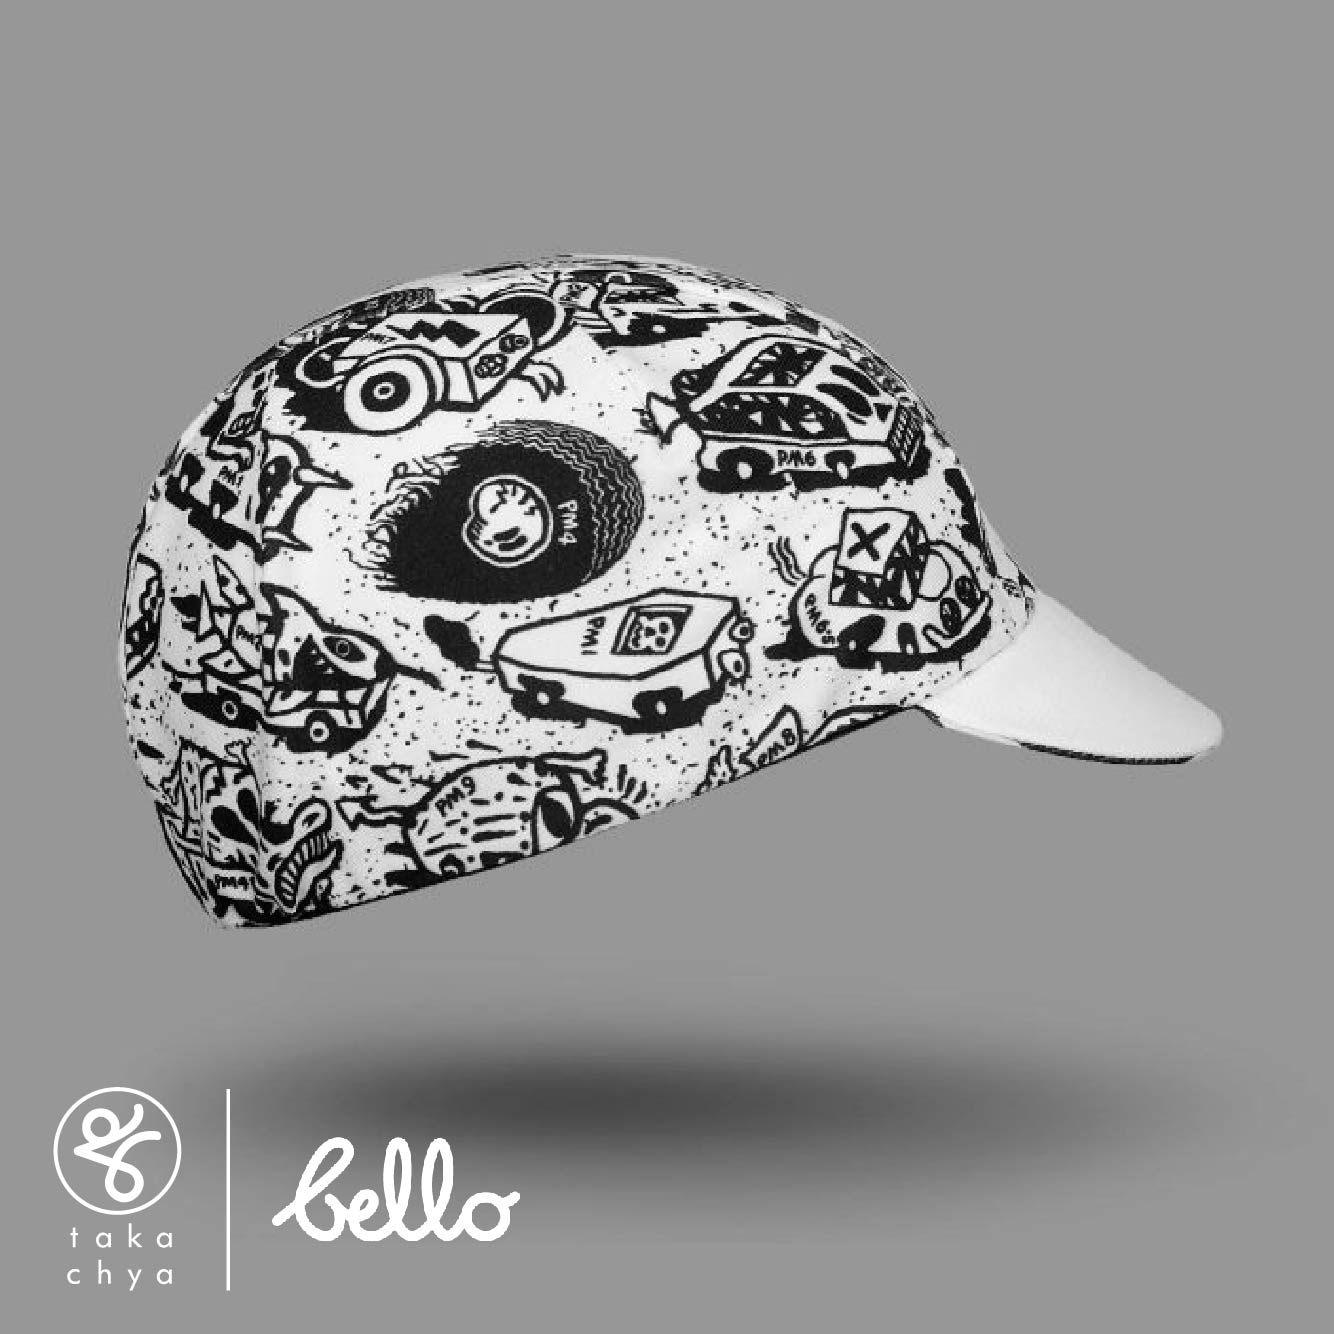 Jody Barton with AIR–INK® (6 COLORS) - Bello Cyclist Designer Collaboration Cycling Cap